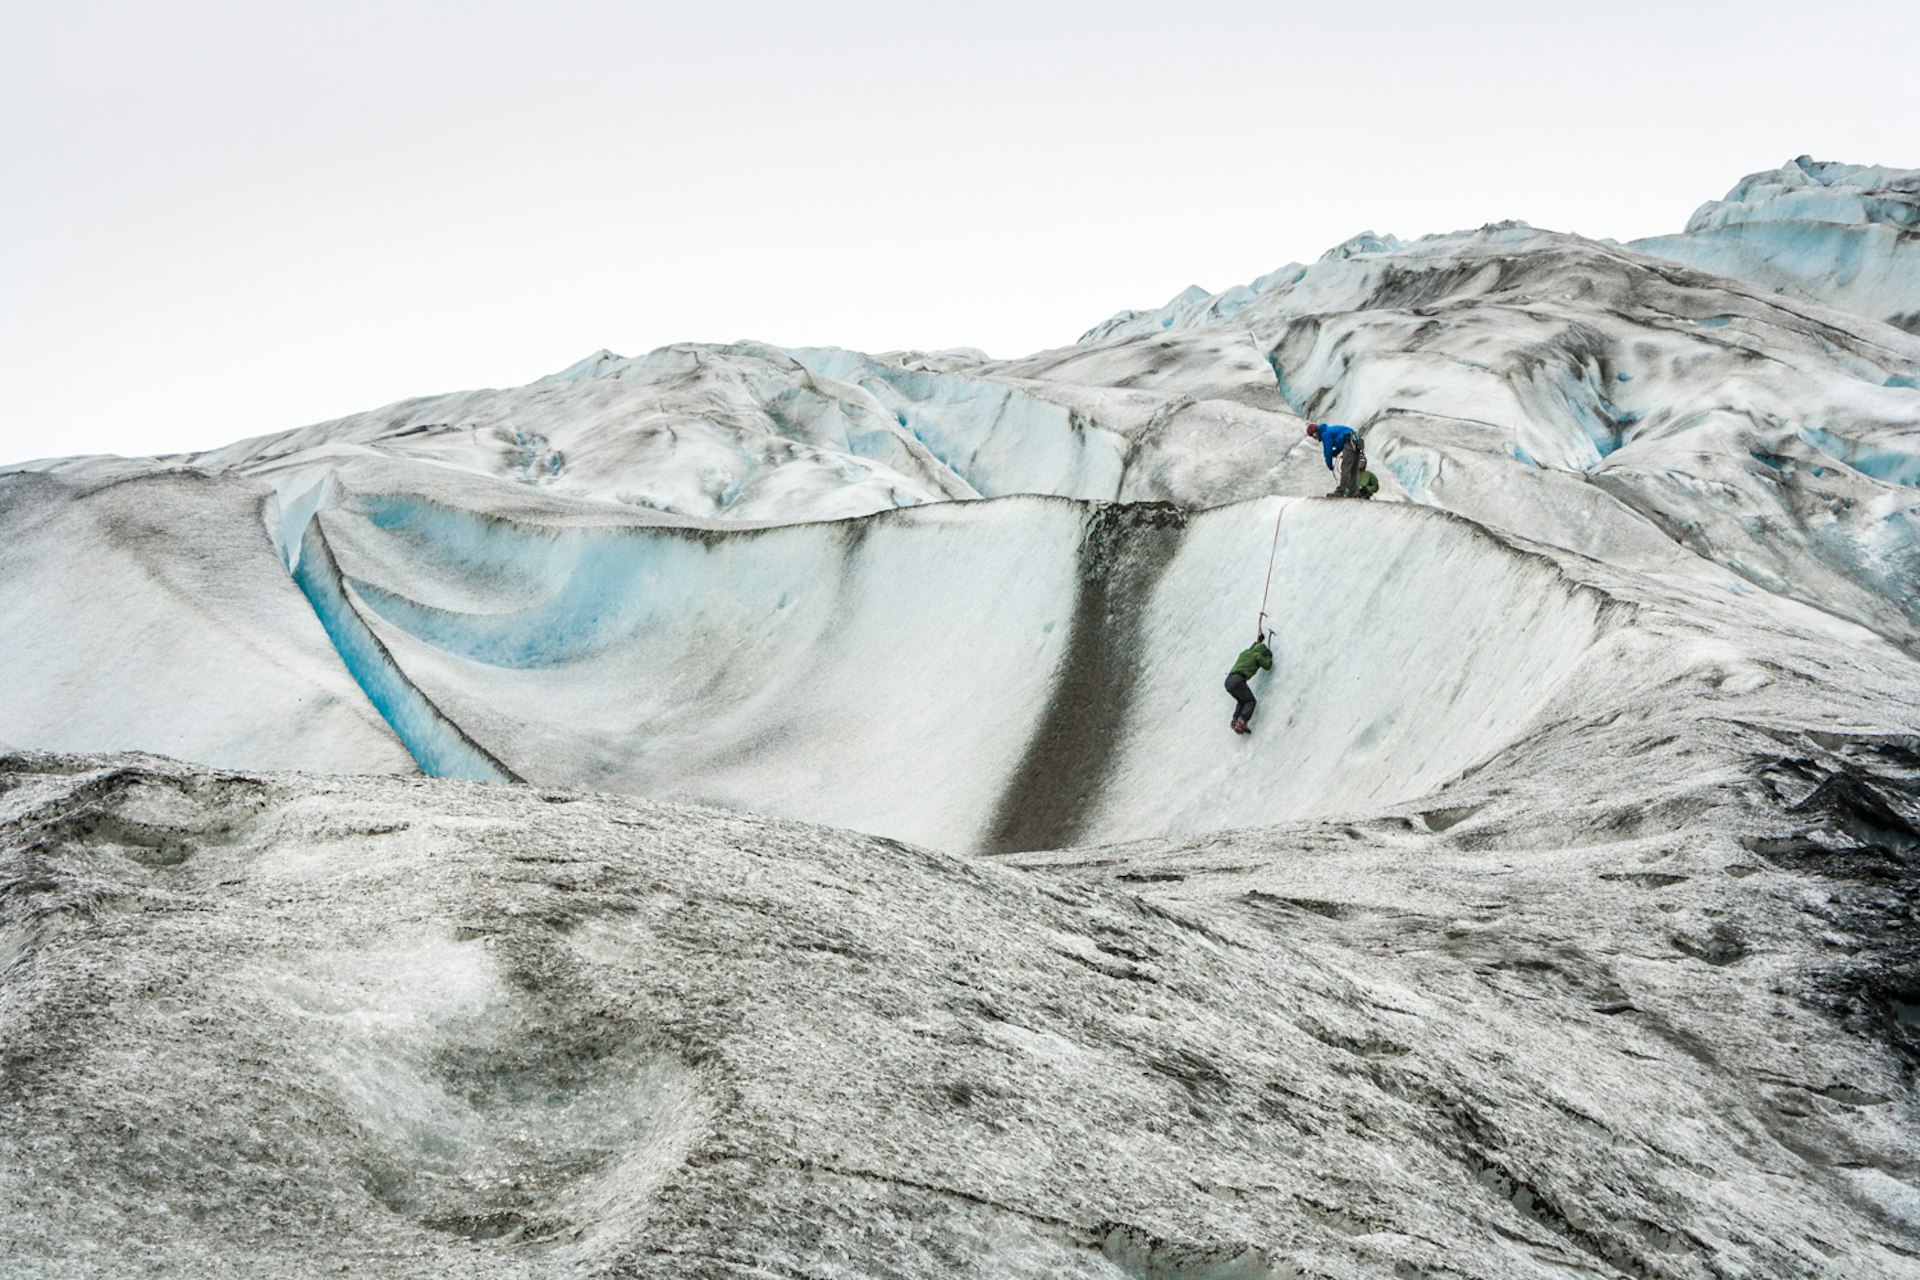 Ice climbers tackling a face of Exit Glacier © Alexander Howard / Lonely Planet